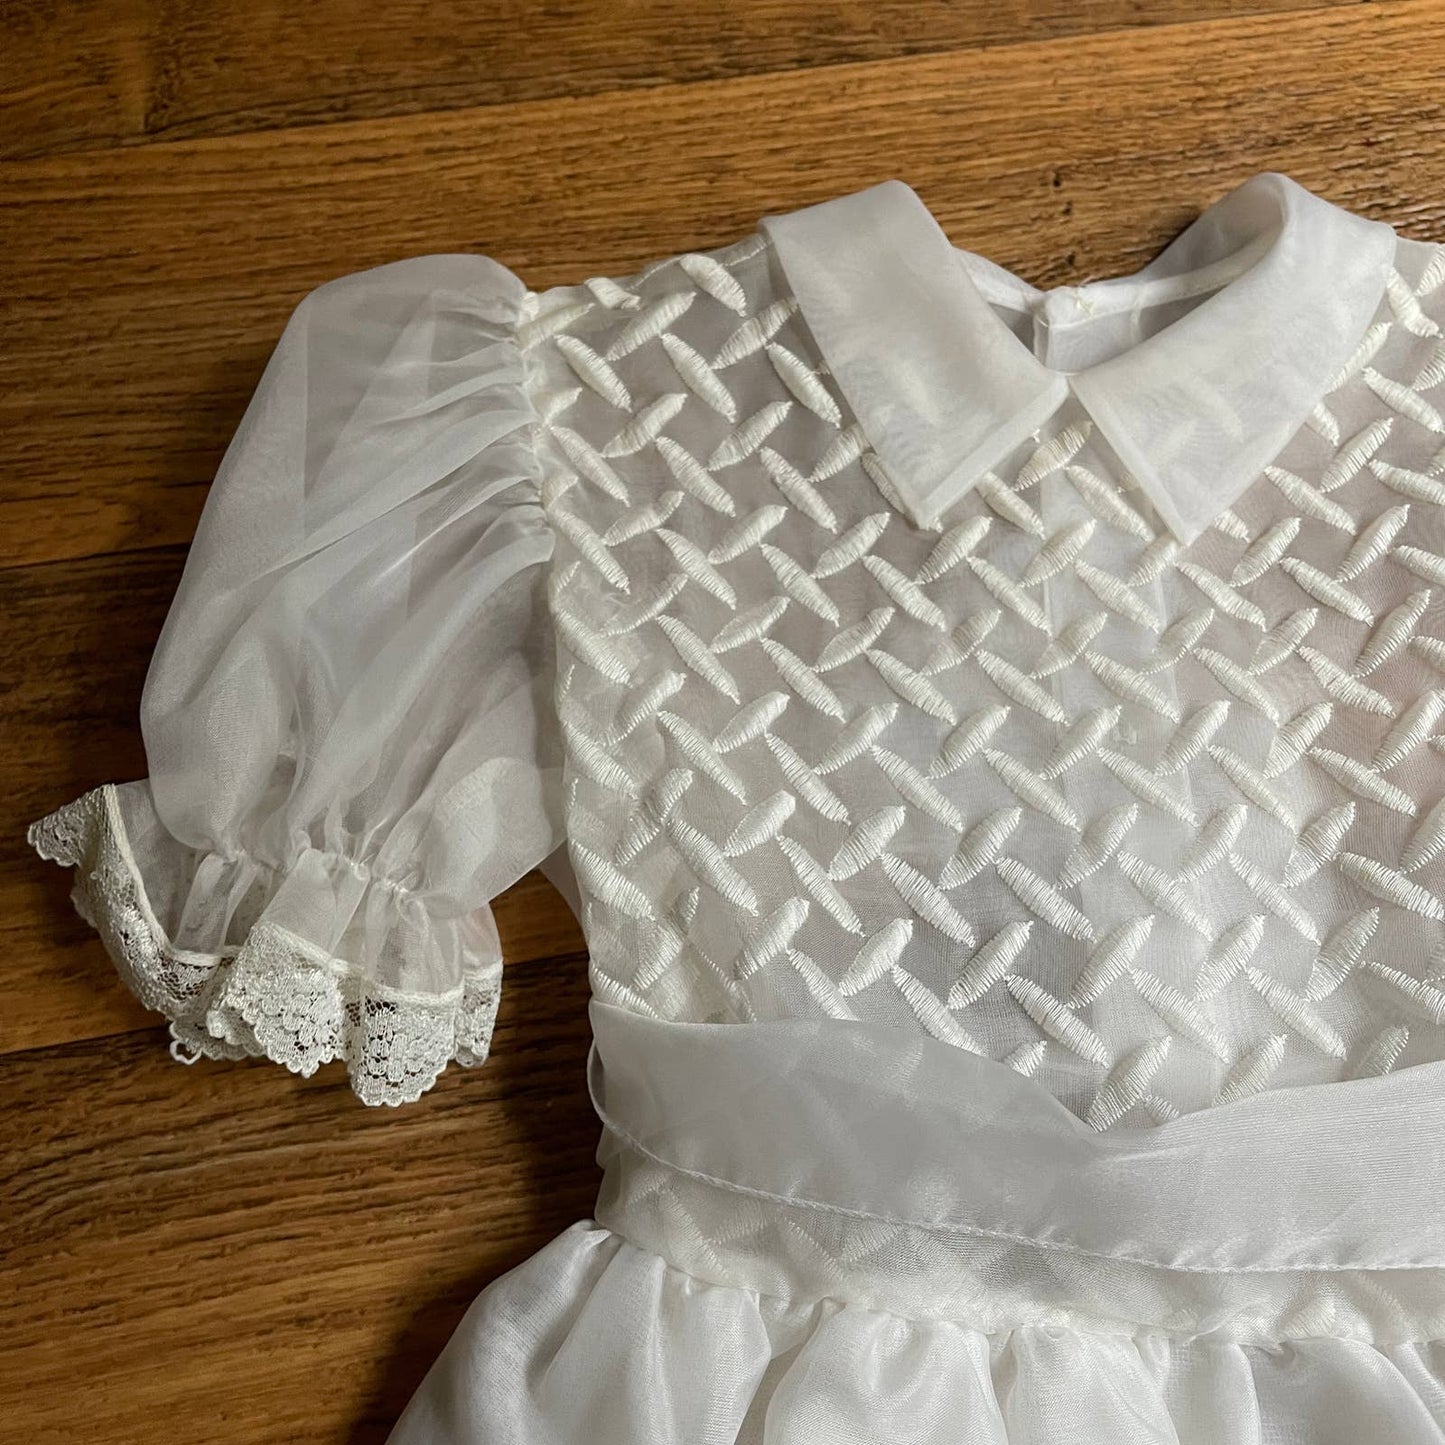 Vintage 50s Puff Sleeve Dress Kids White Sheer Embroidered Bodice Size 5 6